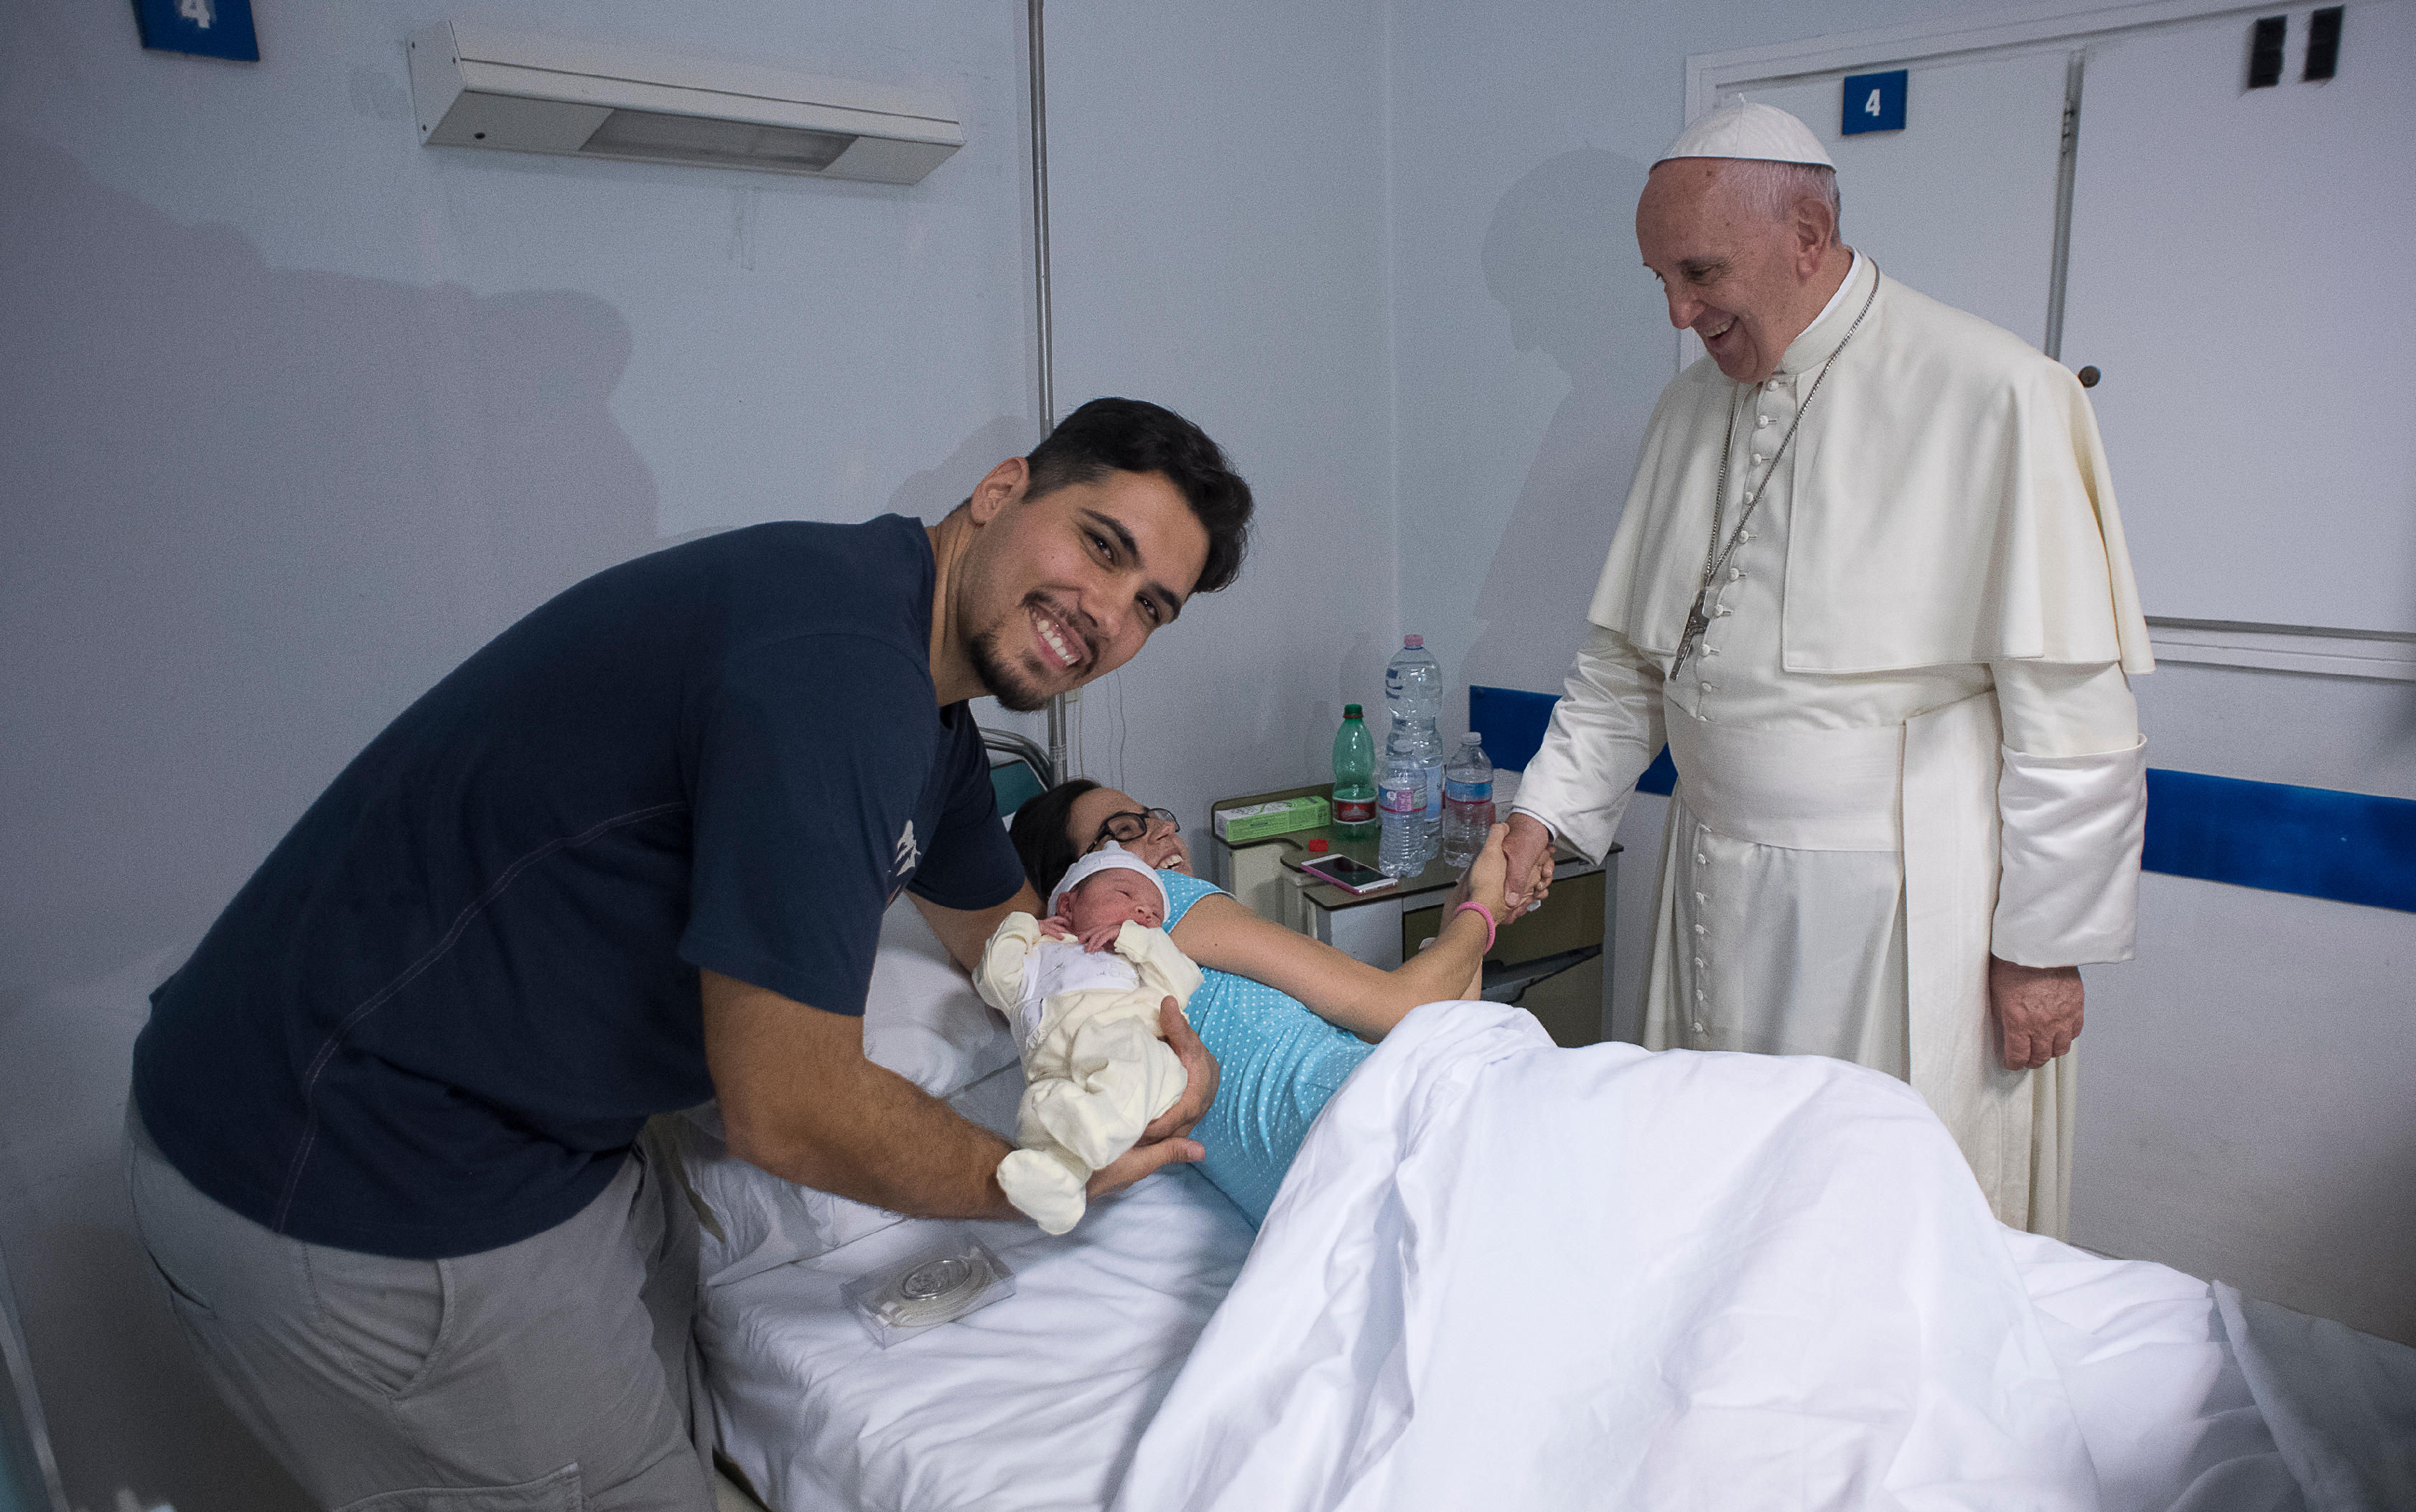 Pope Francis greets a mother as he visits the neonatal unit at San Giovanni Hospital in Rome Sept. 16. The visit was part of the pope's series of Friday works of mercy during the Holy Year. (CNS photo/L'Osservatore Romano, handout)